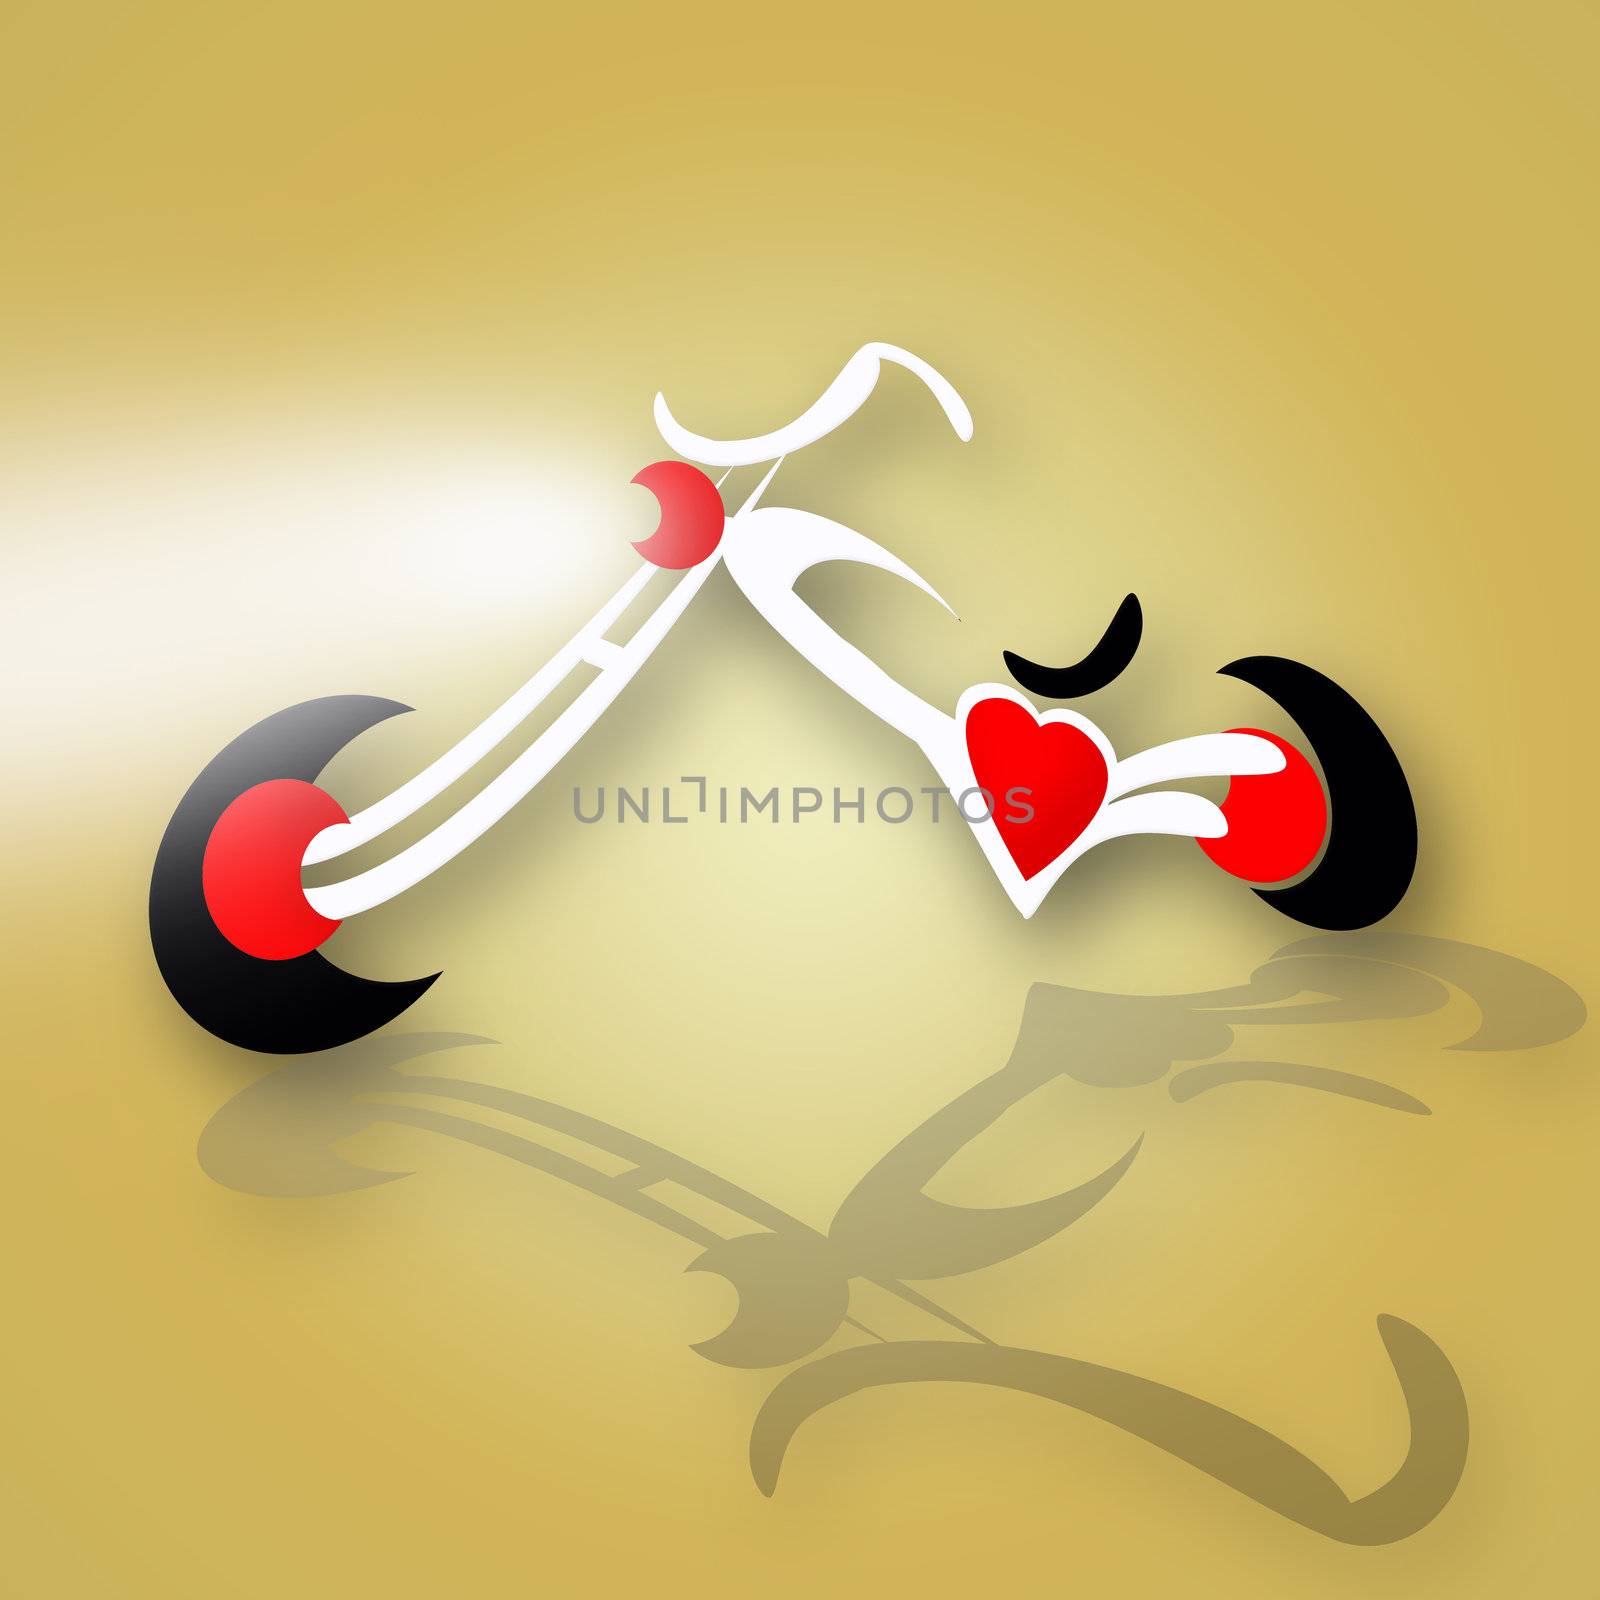 Abstract chopper motorcycle with red heart engine